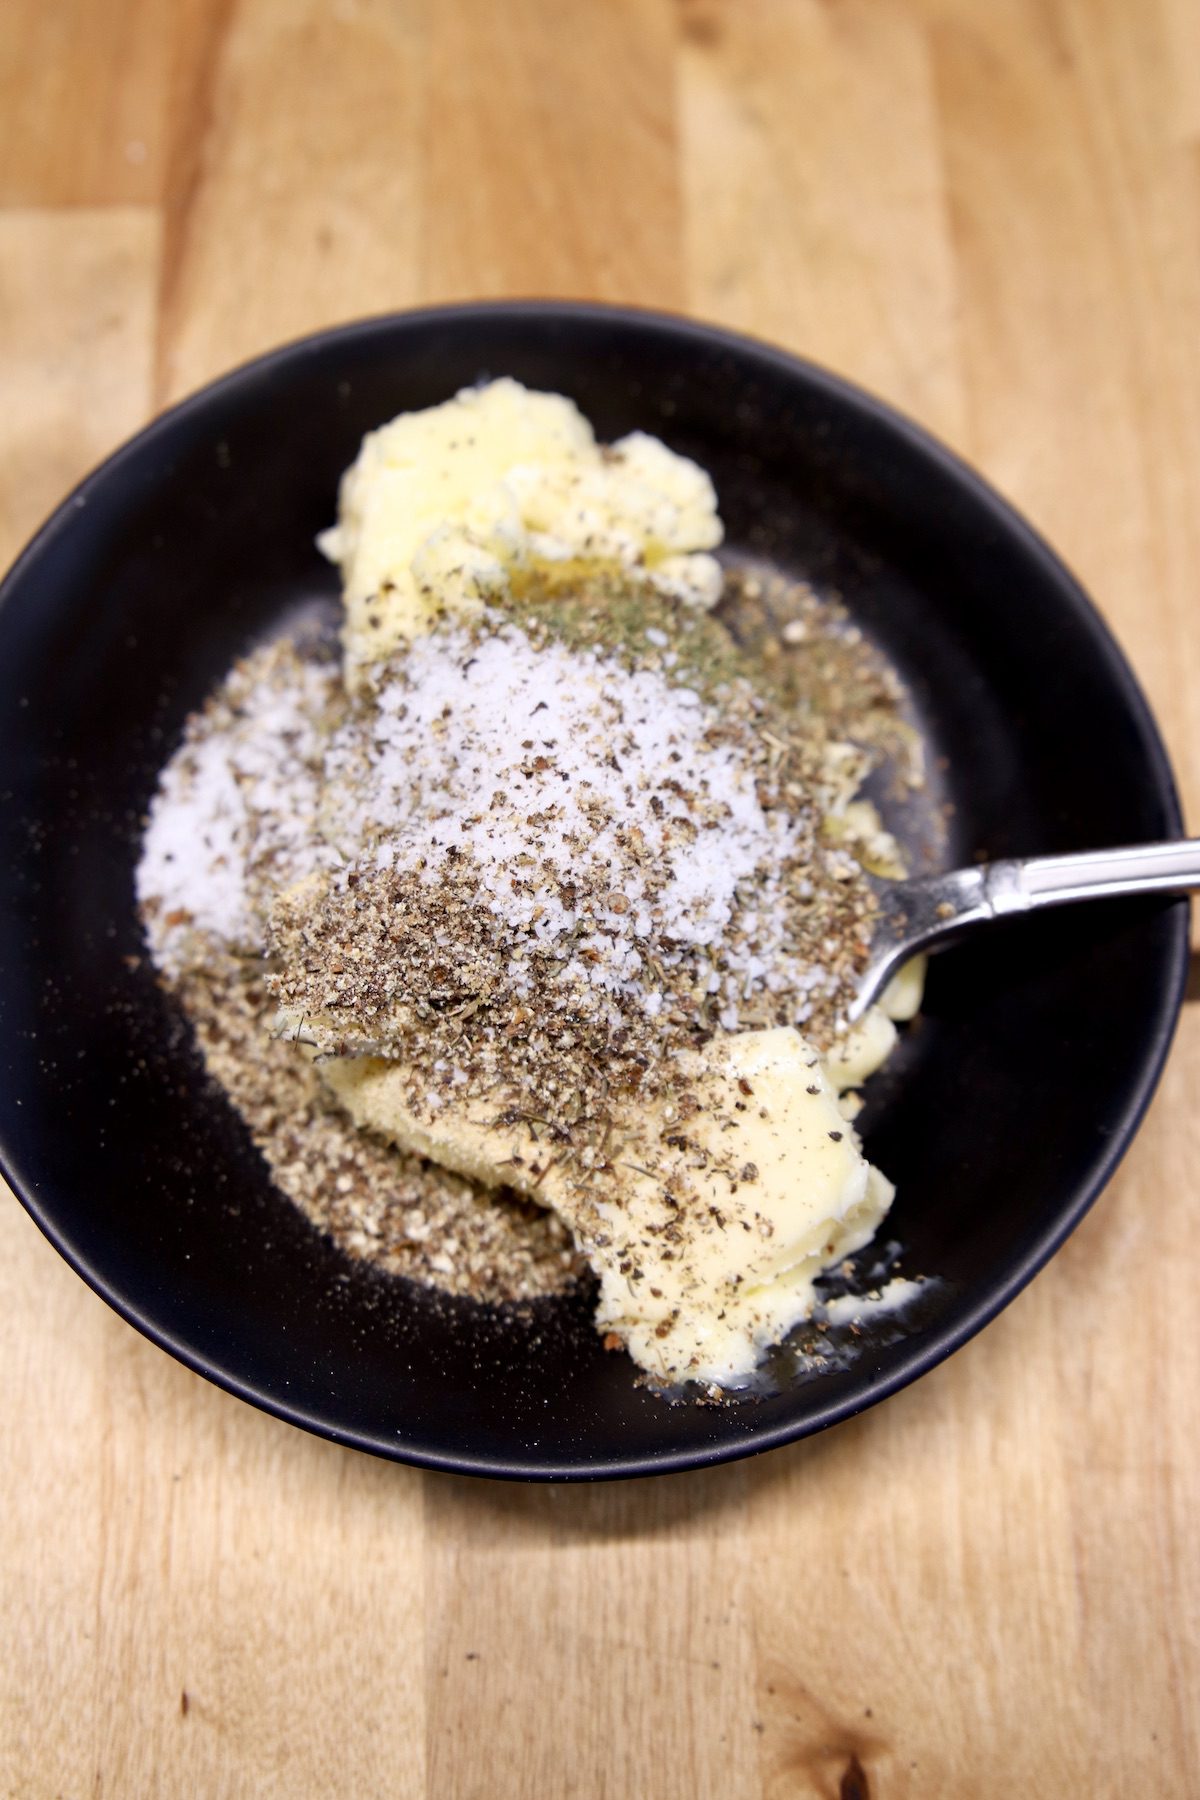 Garlic butter and herbs - in a bowl, not mixed